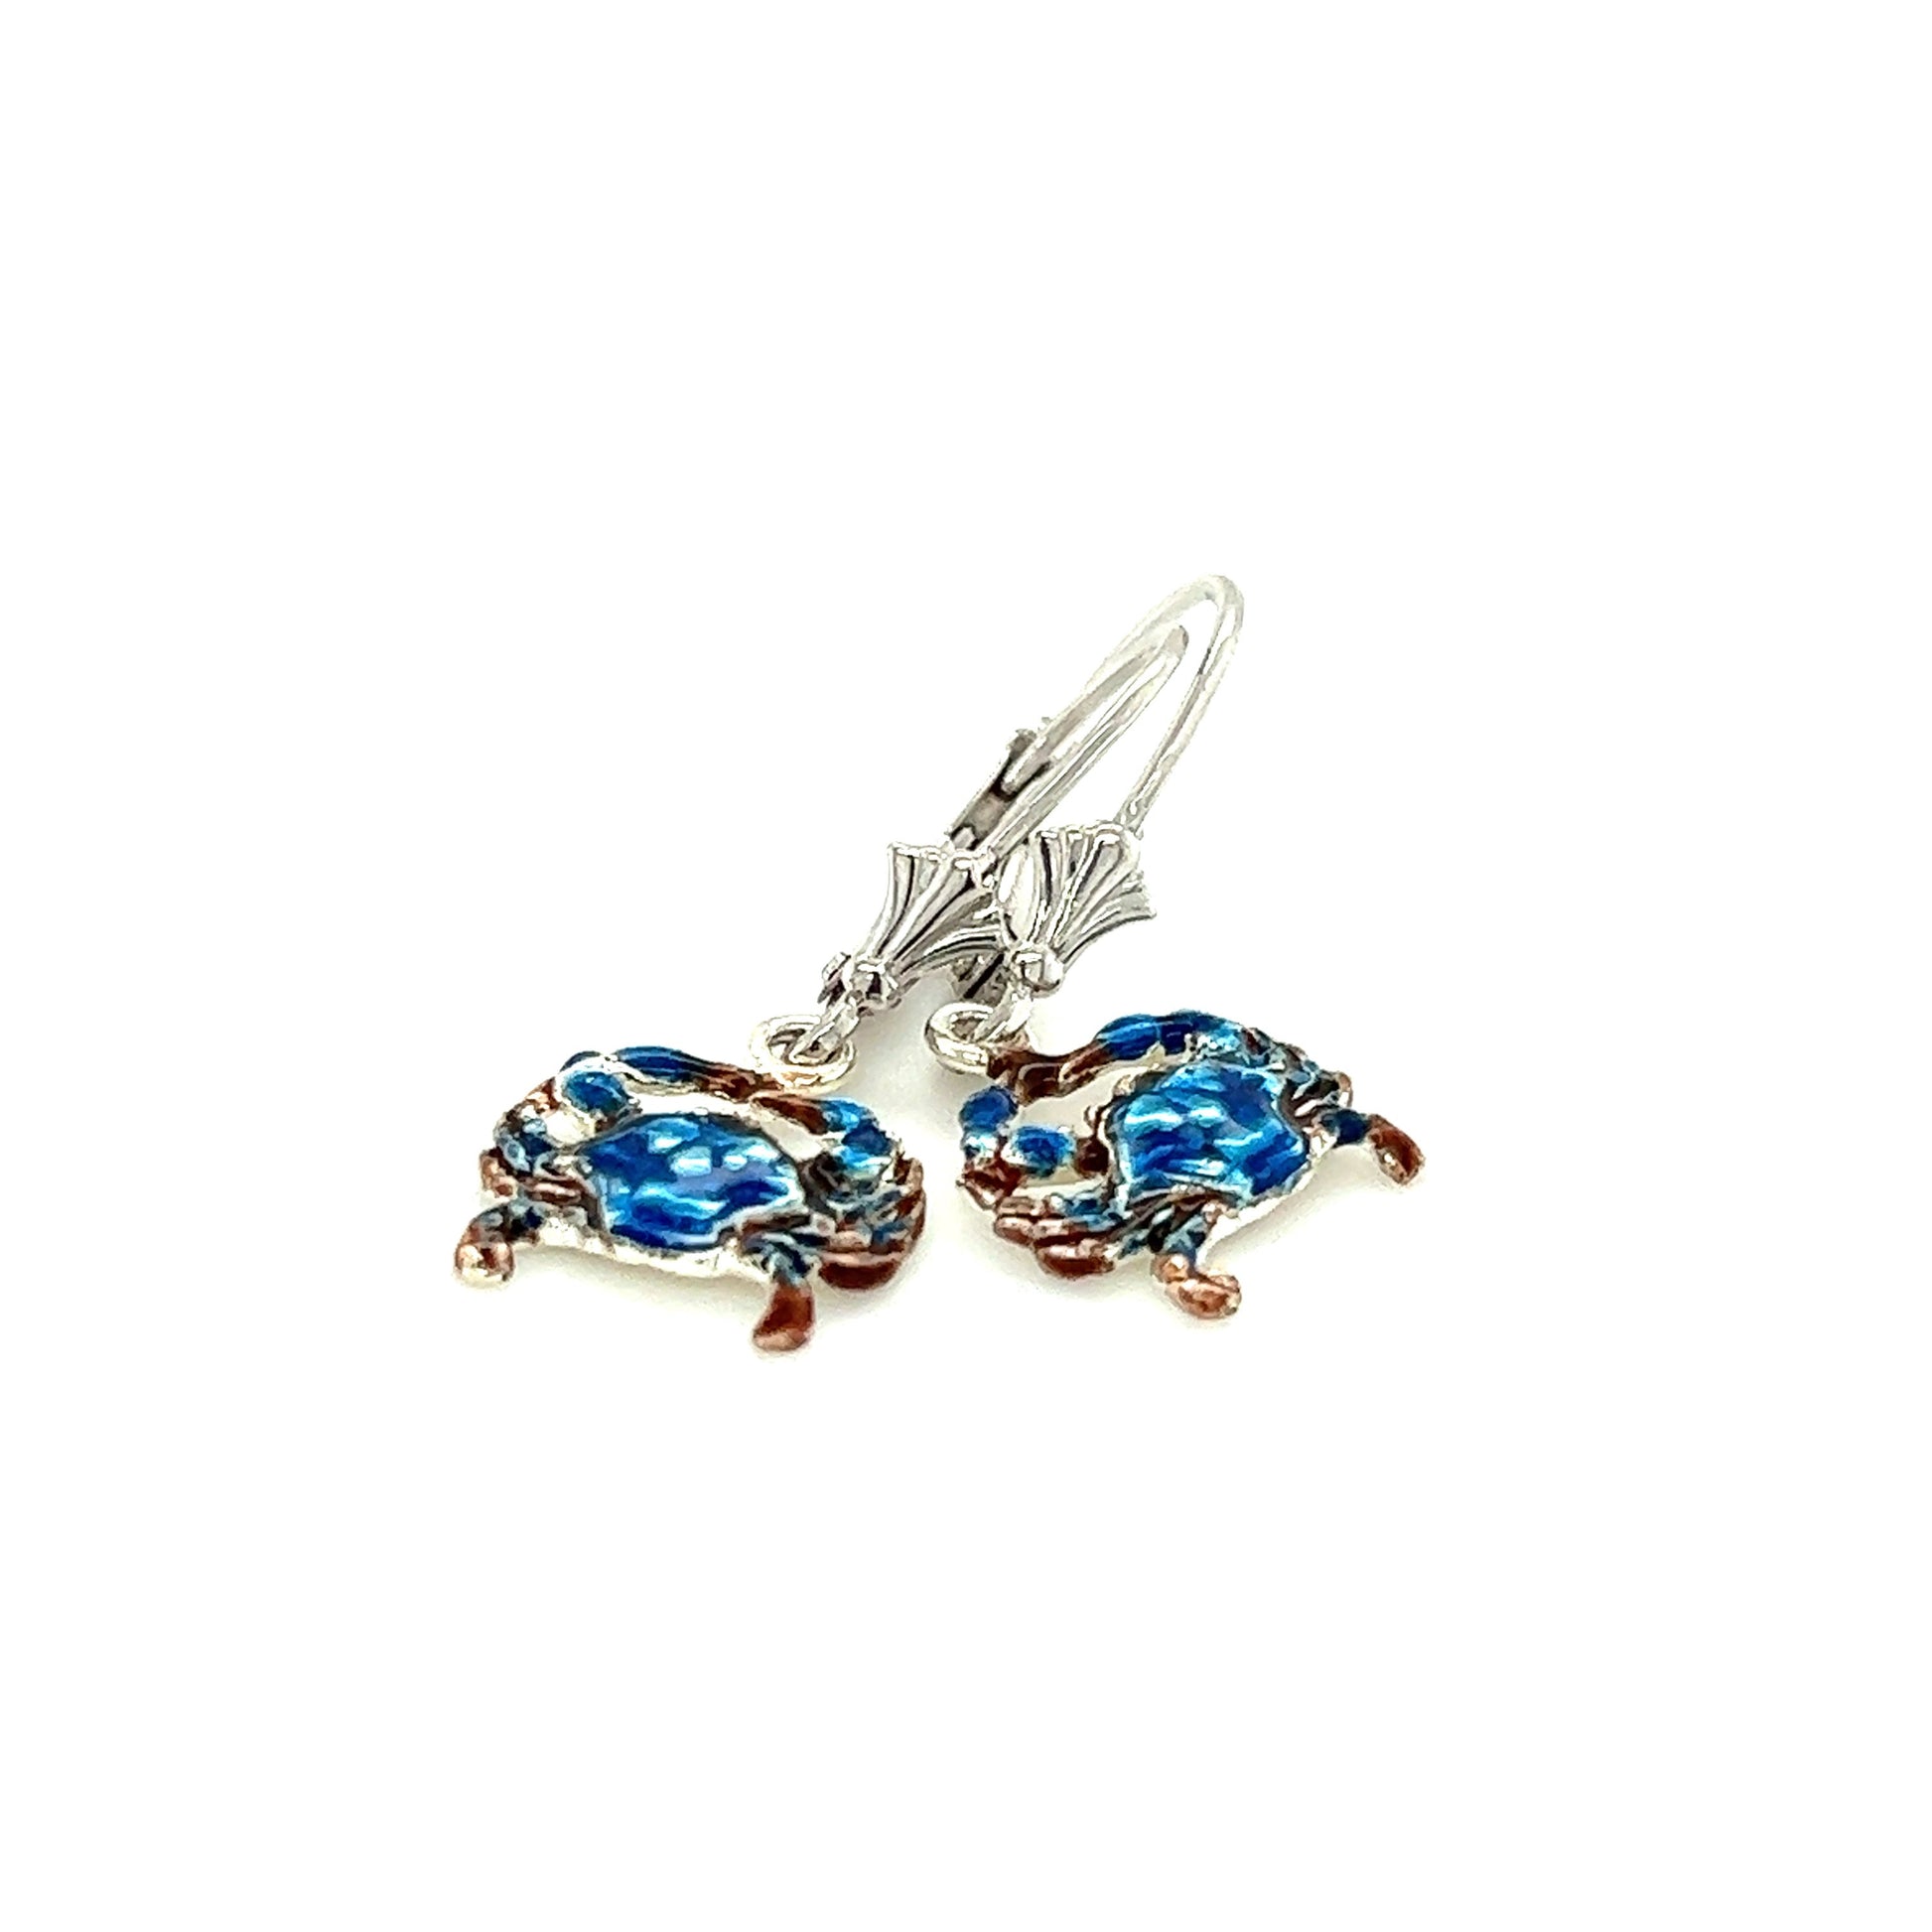 Small Blue Crab Dangle Earrings with Enameling in Sterling Silver Flat Front View